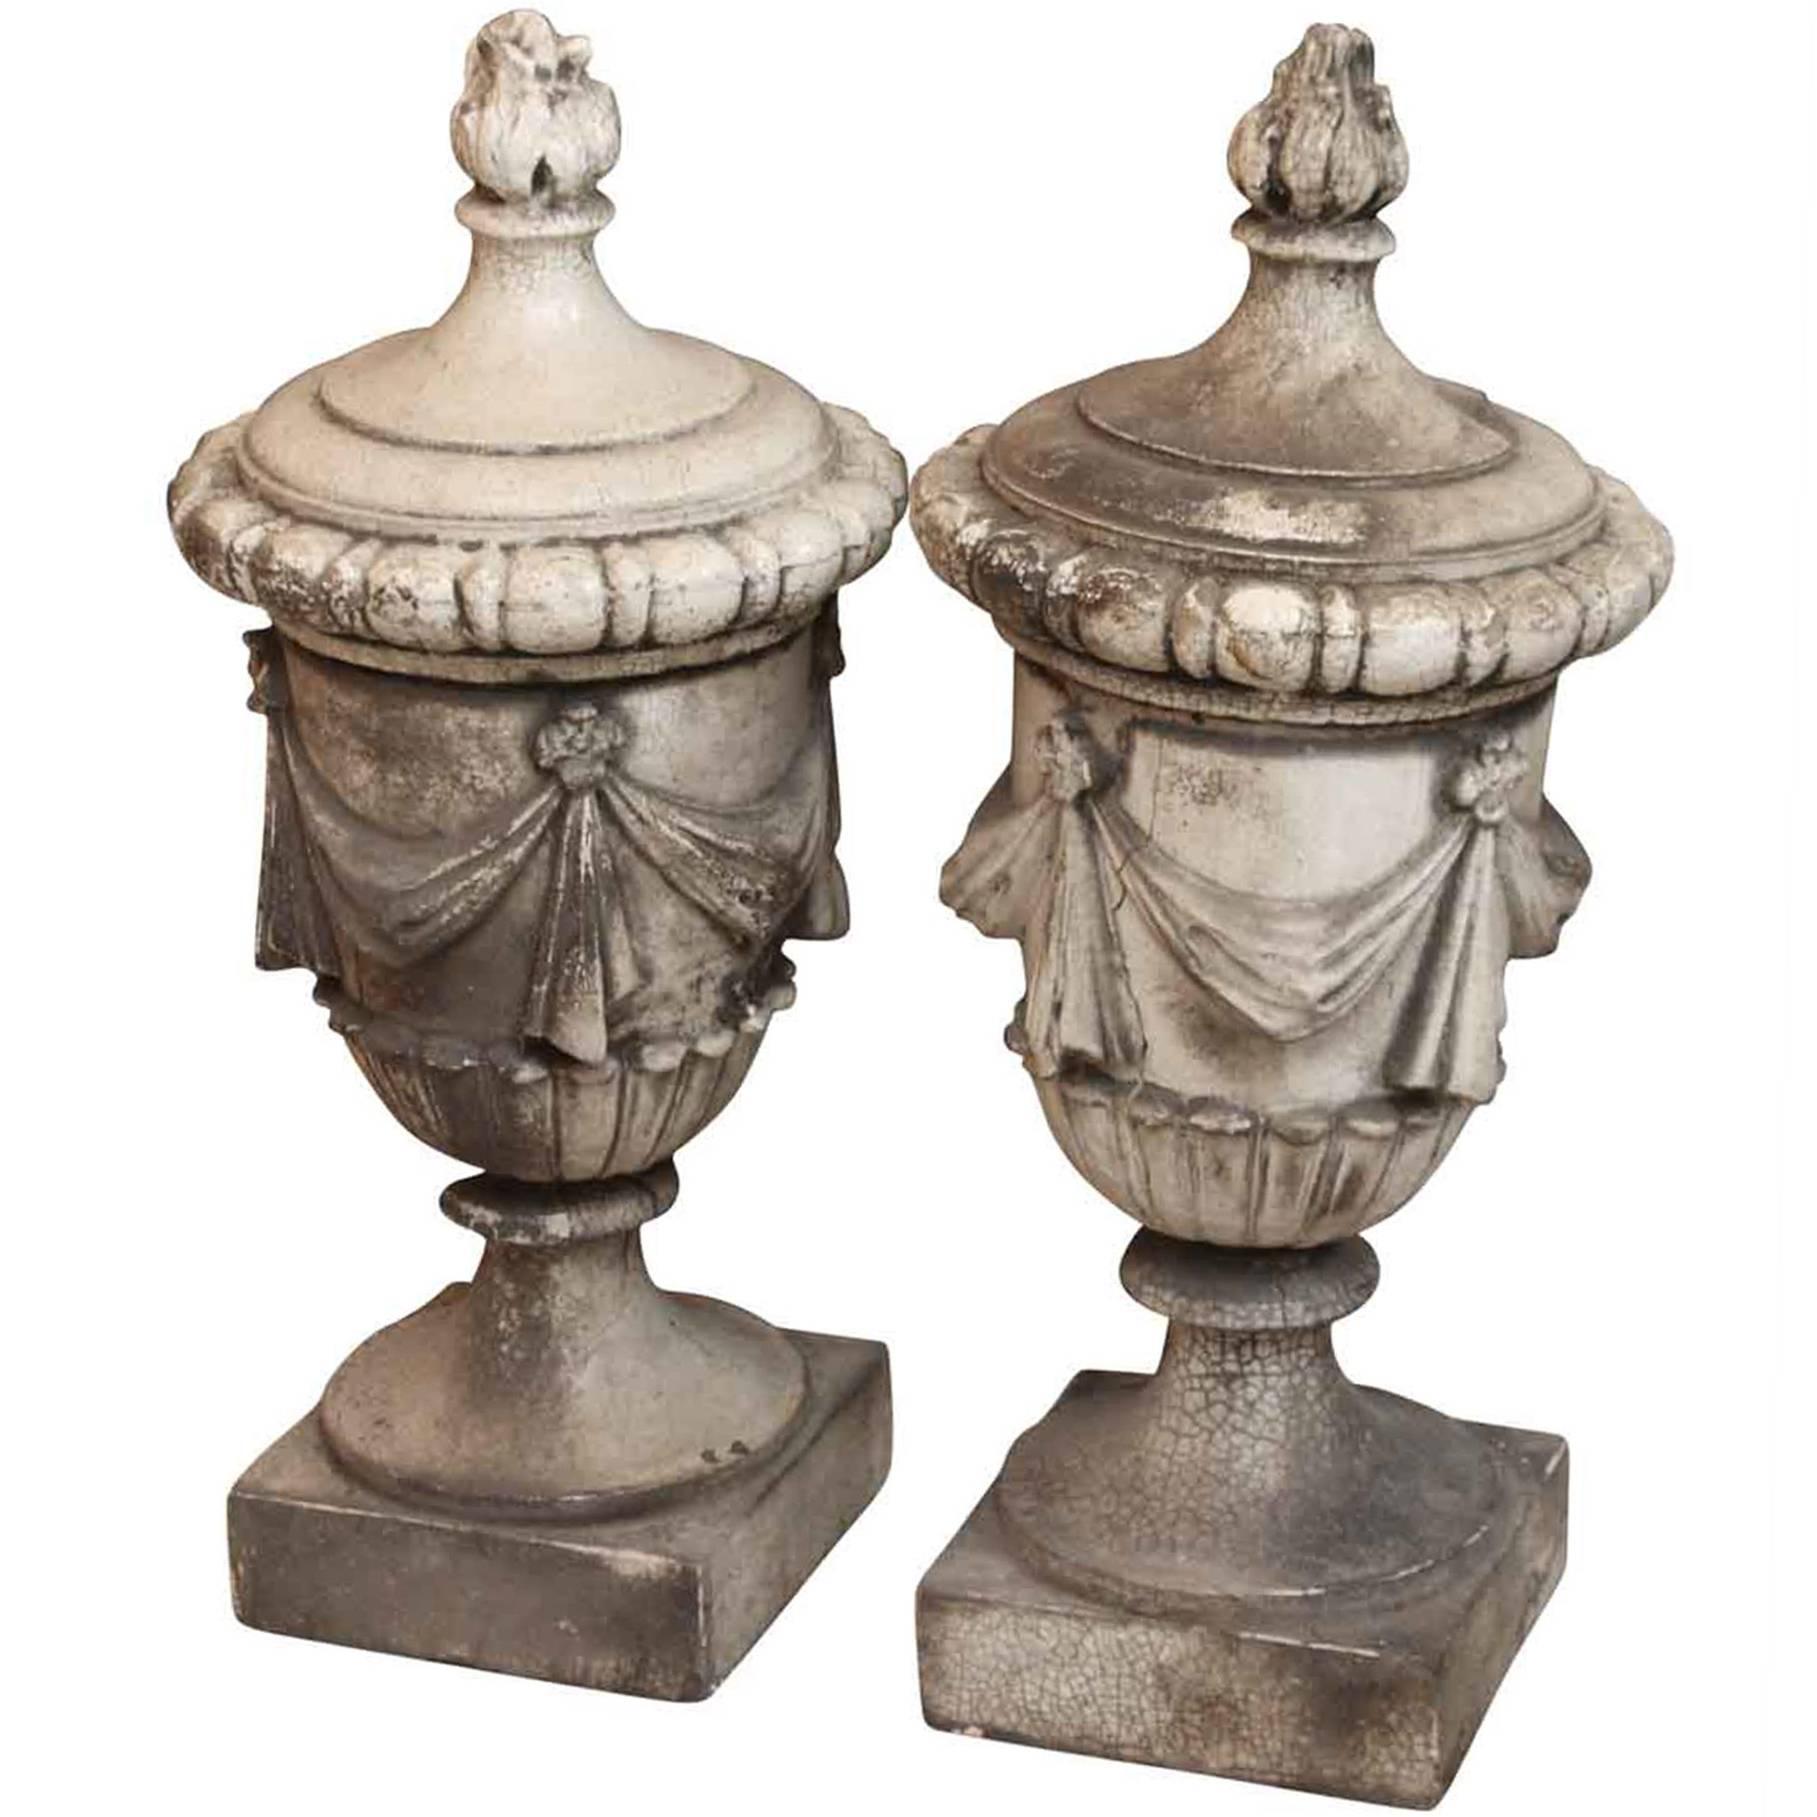 1890s Pair of White Crackled Terracotta Urns with Swags